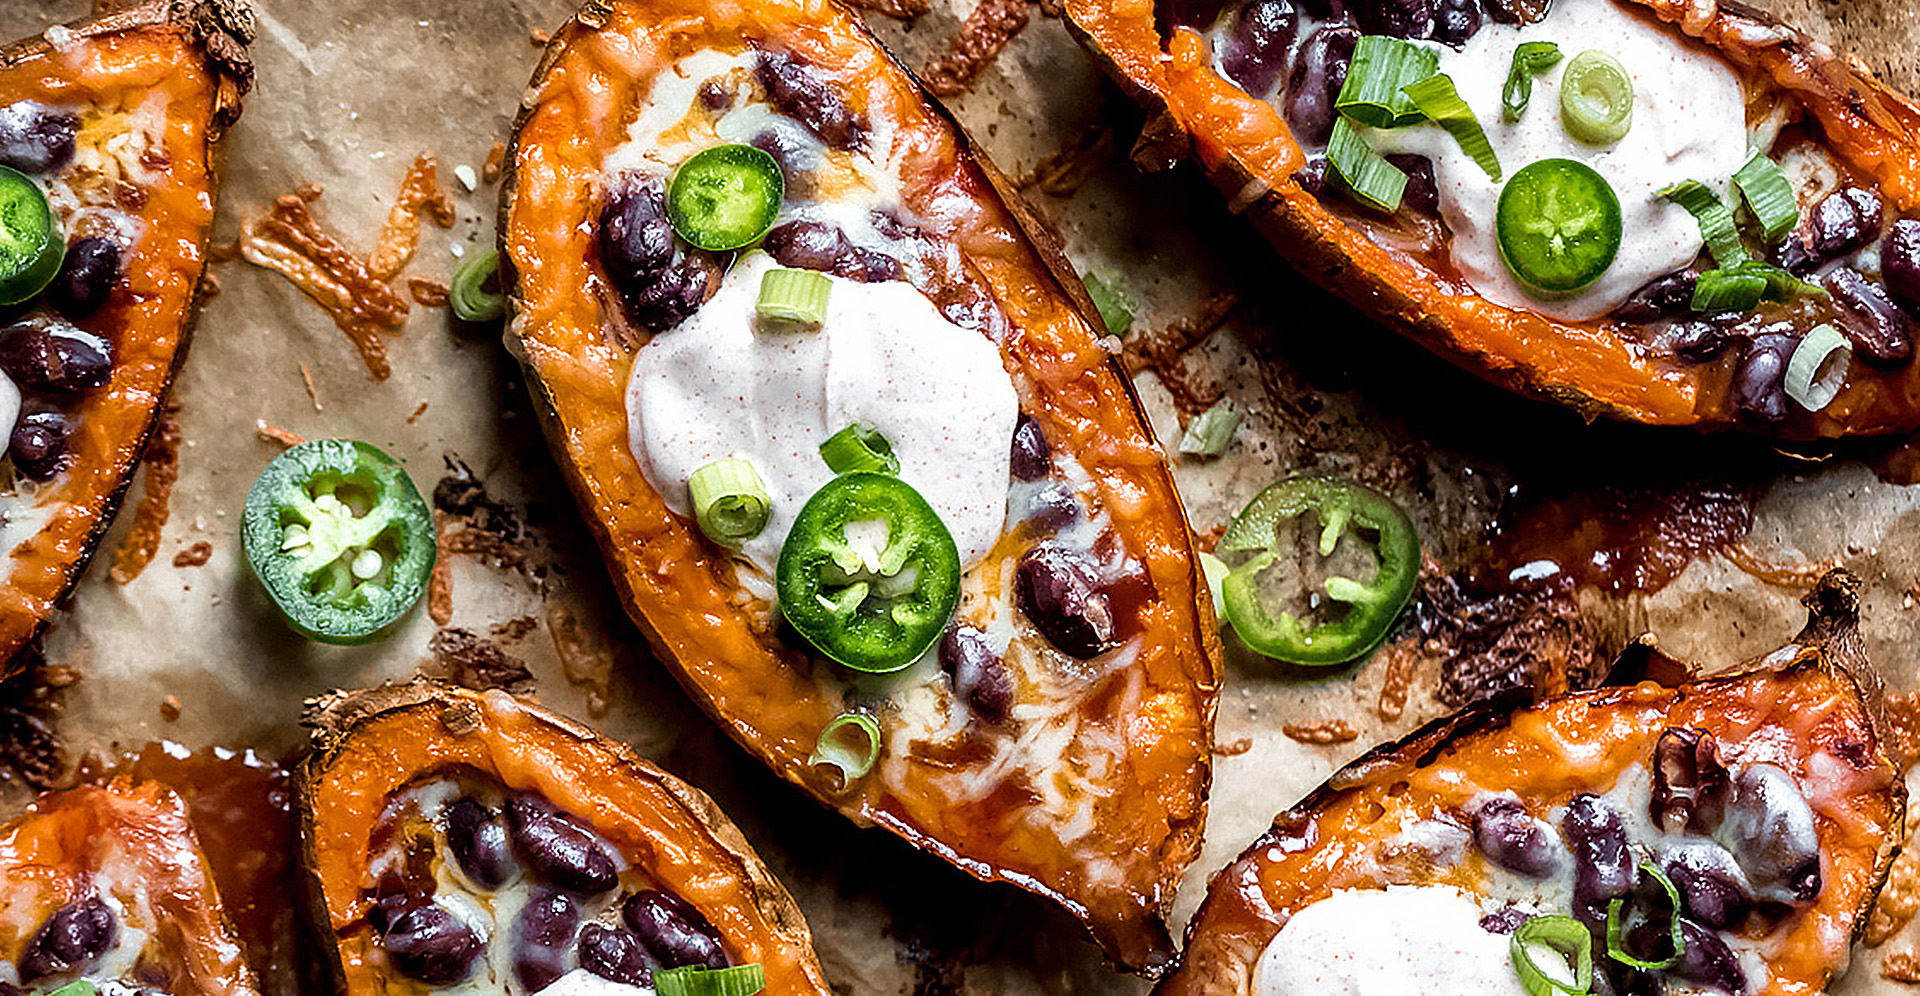 Baked stuff sweet potato skins with chili beans, cheese, green onions and jalapenos